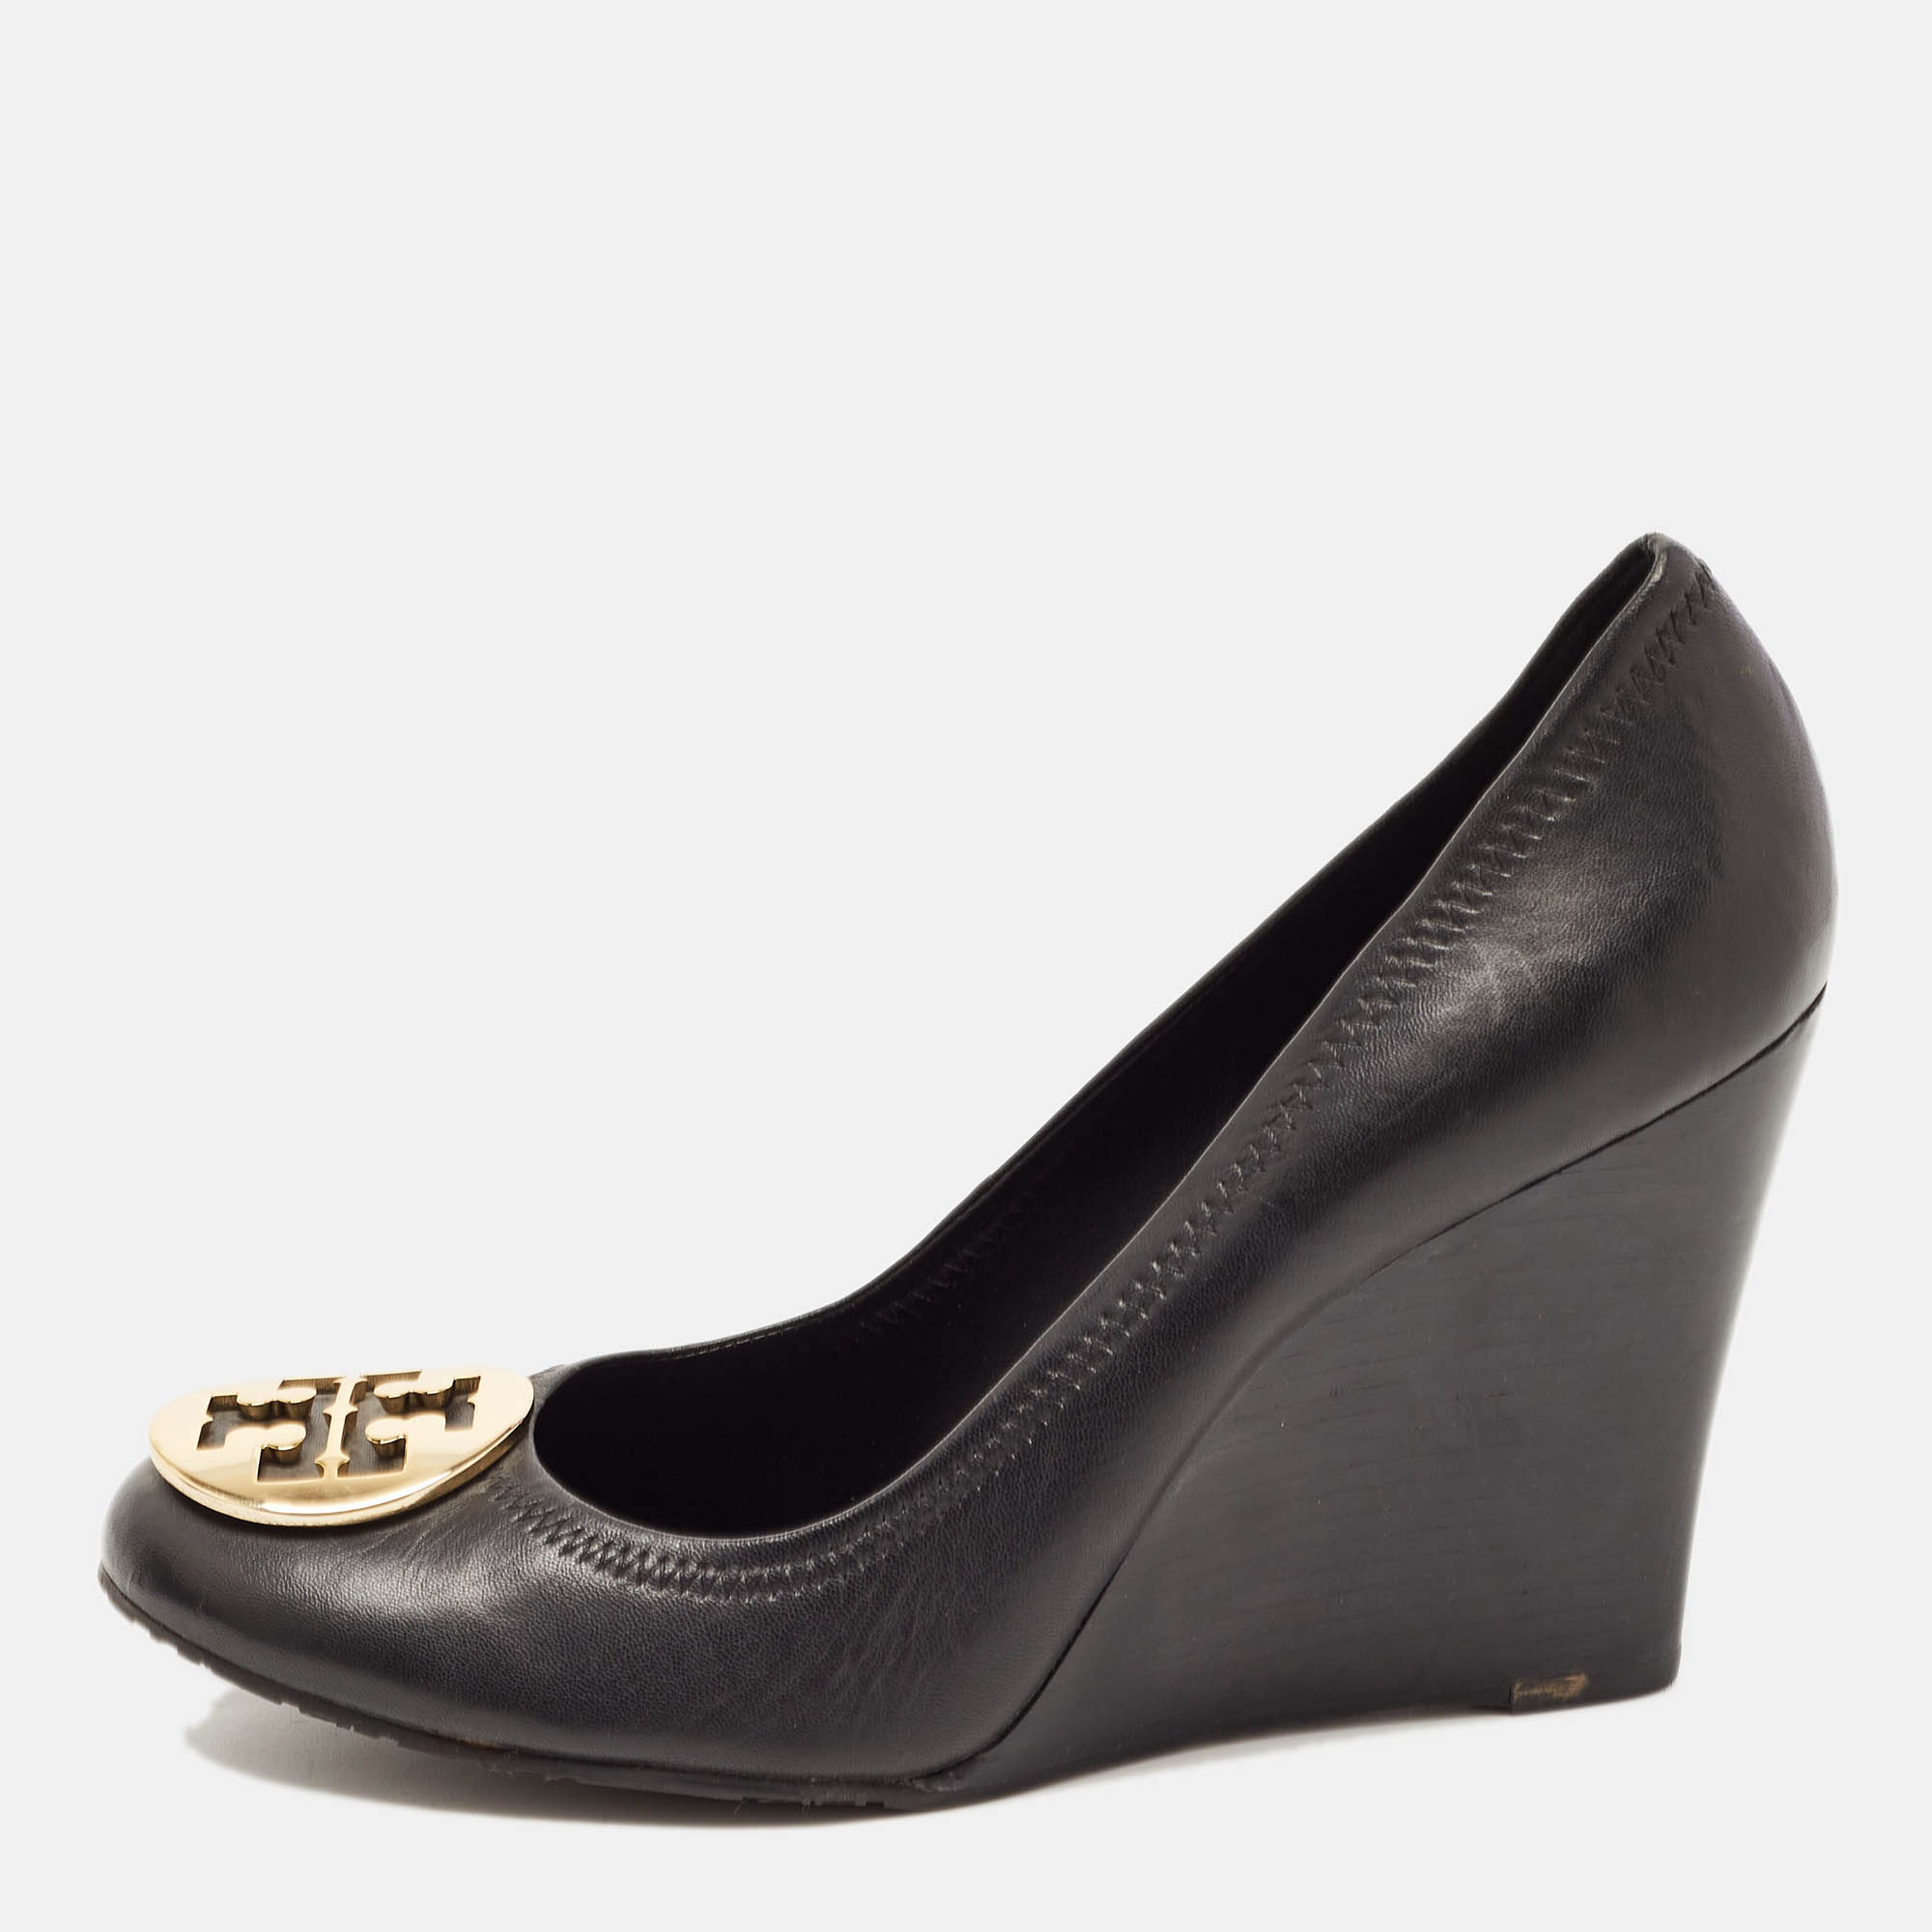 Pre-owned Tory Burch Black Leather Chelsea Wedge Pumps Size 40.5